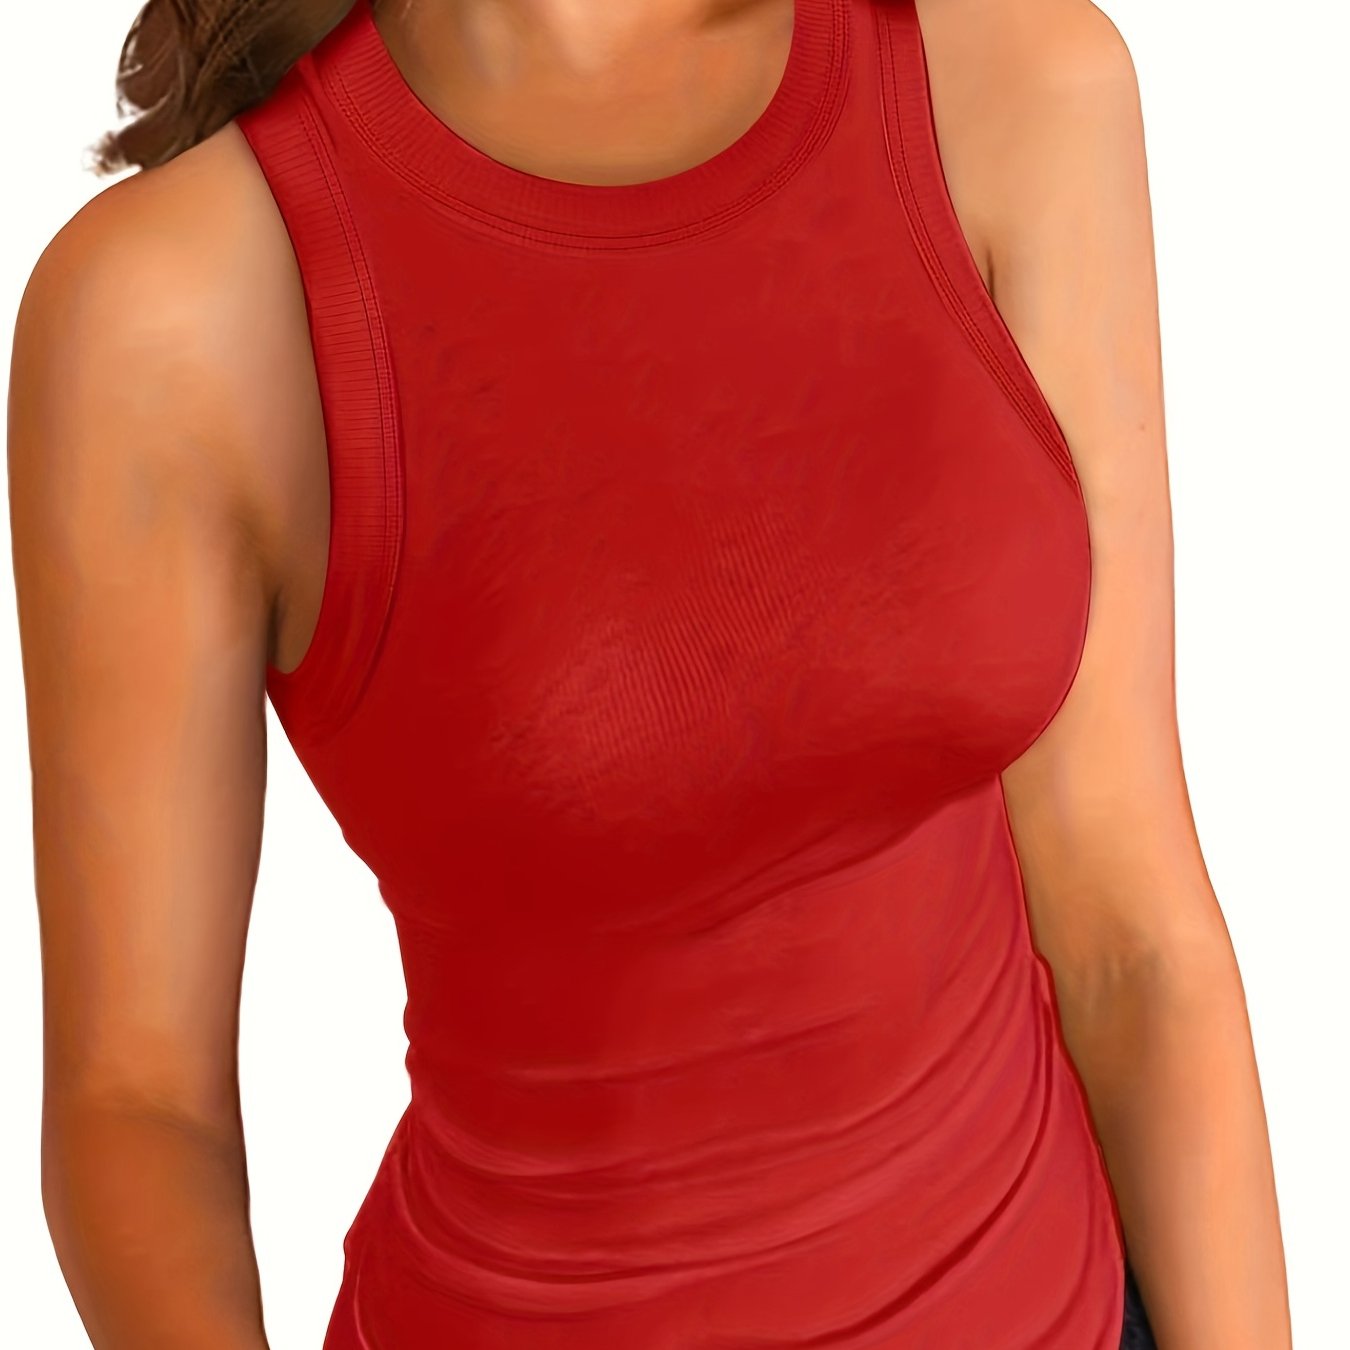 Women's Stylish Sleeveless Sports Tank Top - Perfect For Fitness & Casual Wear!